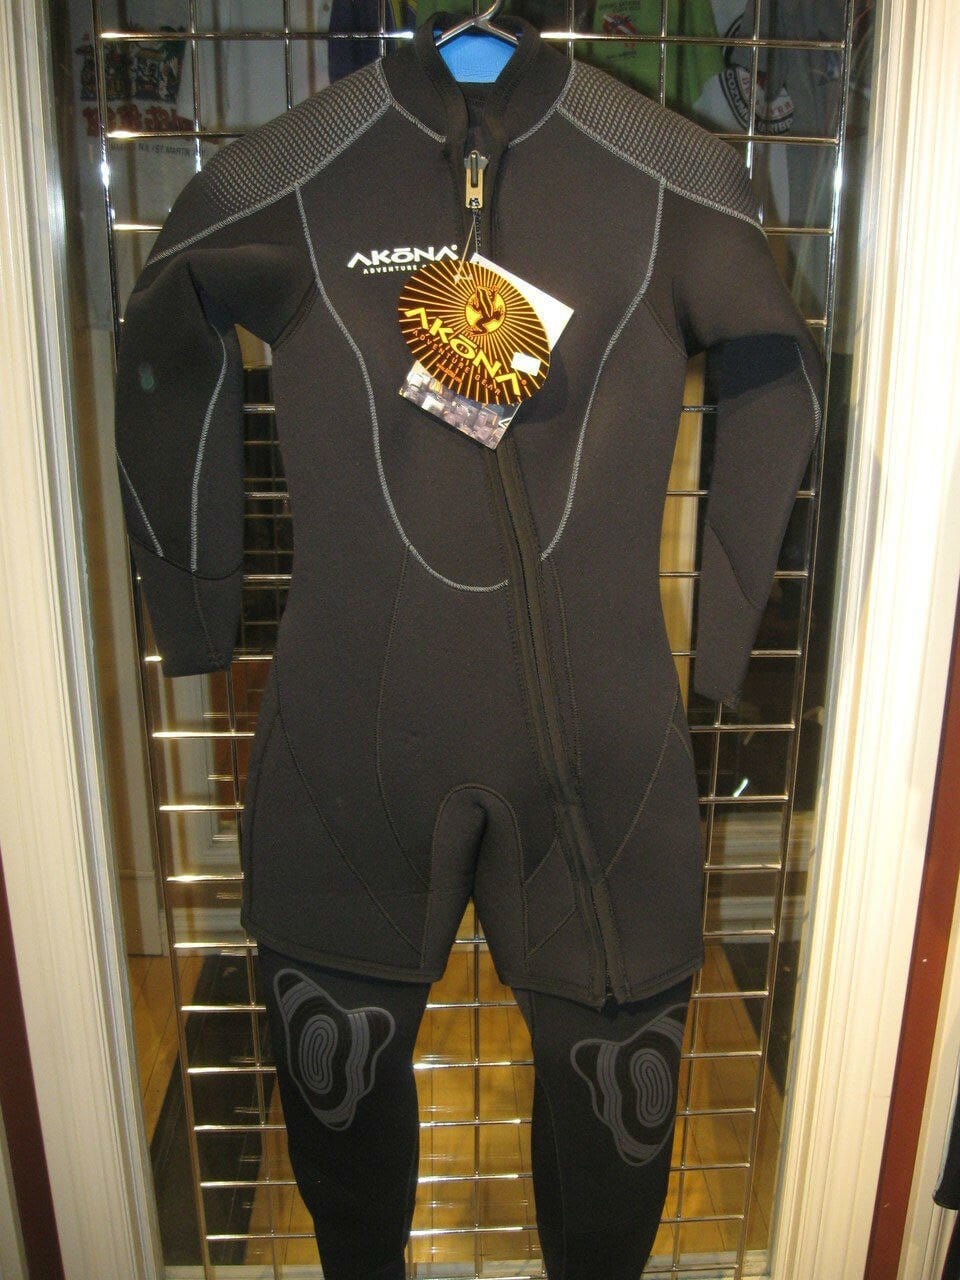 Akona 2 Piece AKMS408 6.5mm Mens Wetsuit (New) Reduced!